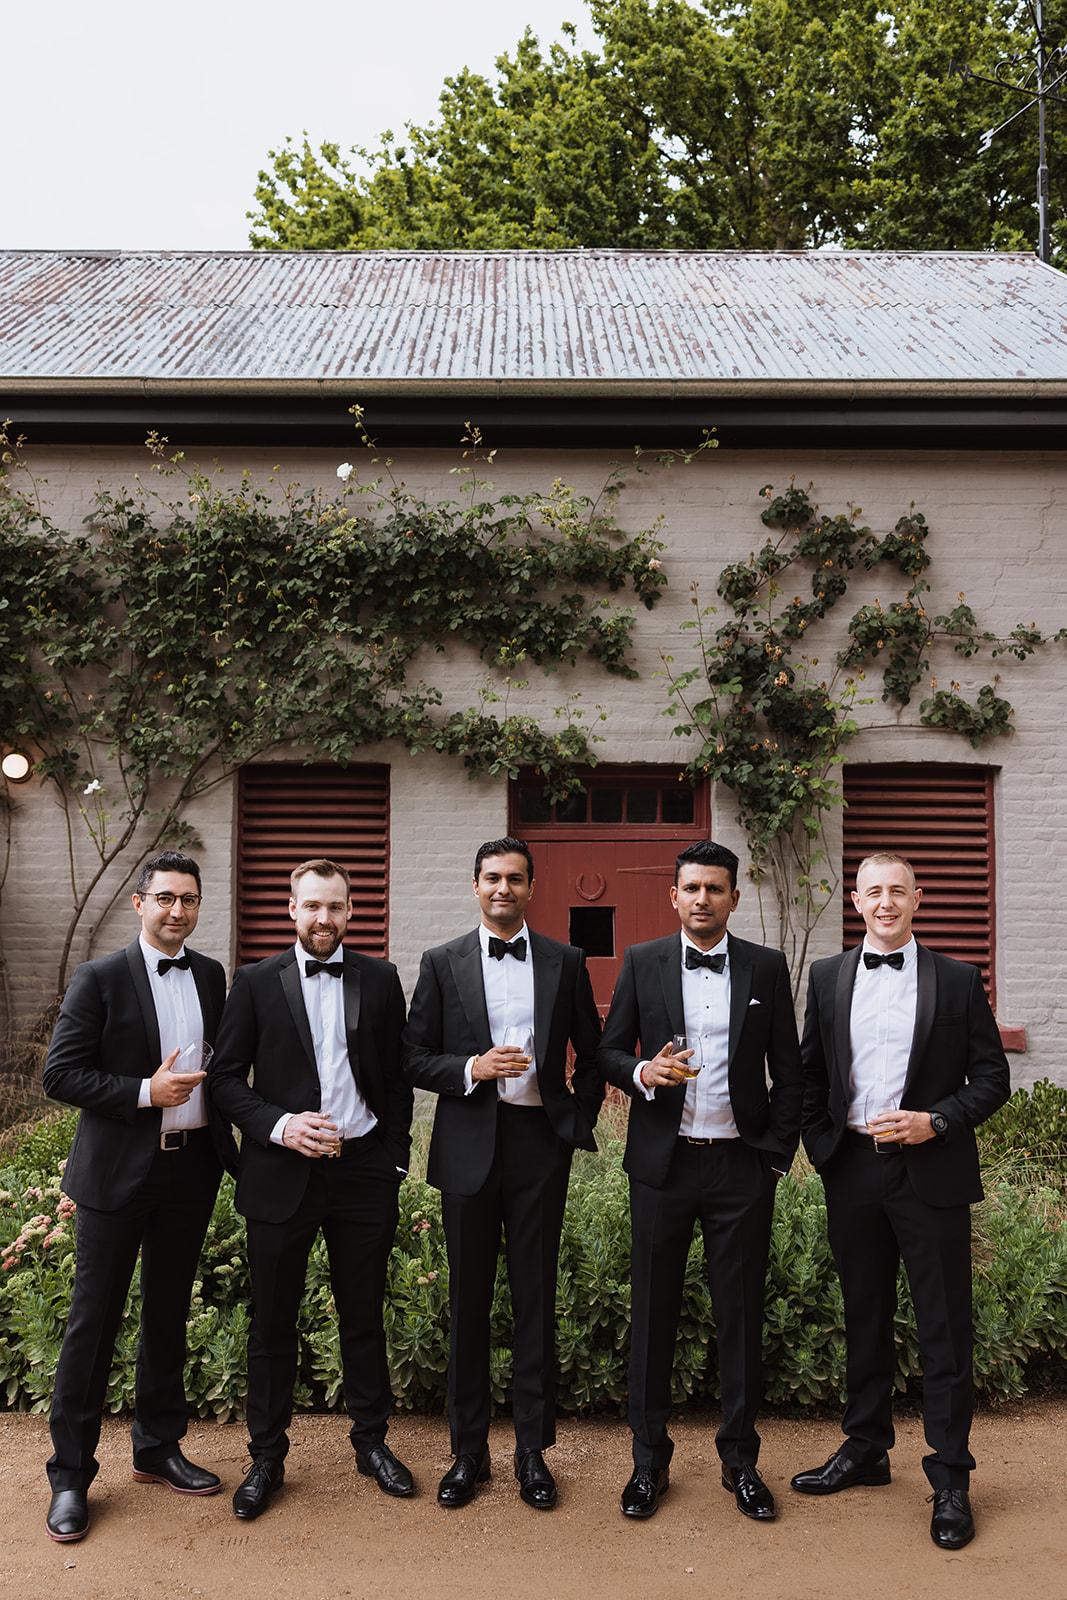 Groom and groomsmen at the Wedding in Mona Farm Braidwood, New South Wales